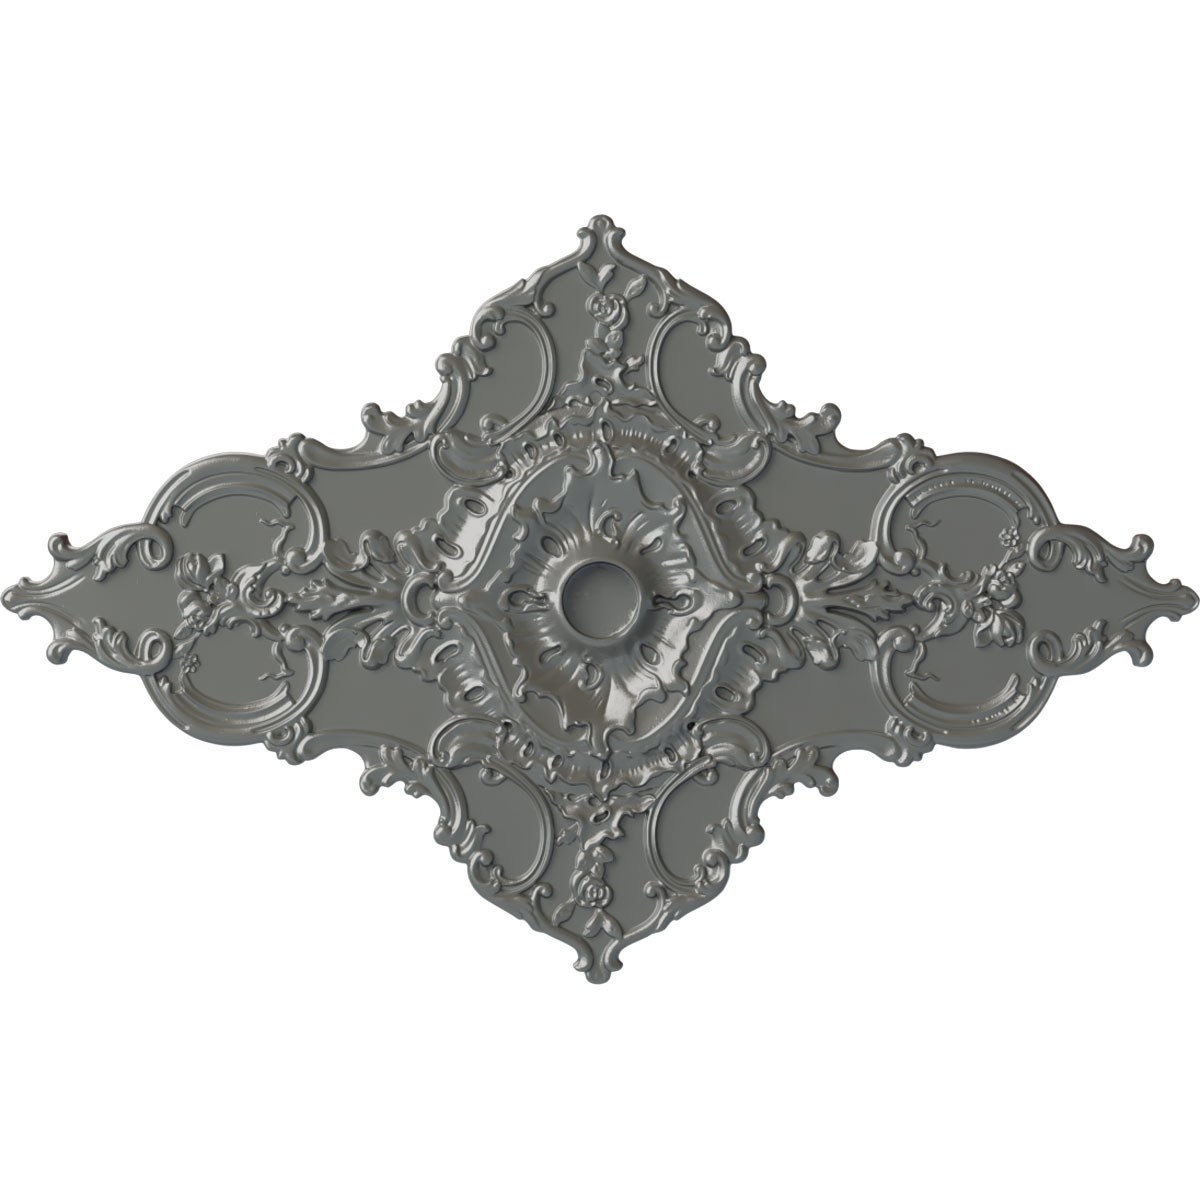 67 1/4"W x 43 3/8"H x 4"ID x 2"P Melchor Diamond Ceiling Medallion (Fits Canopies up to 4"), Hand-Painted Silver - image 1 of 4